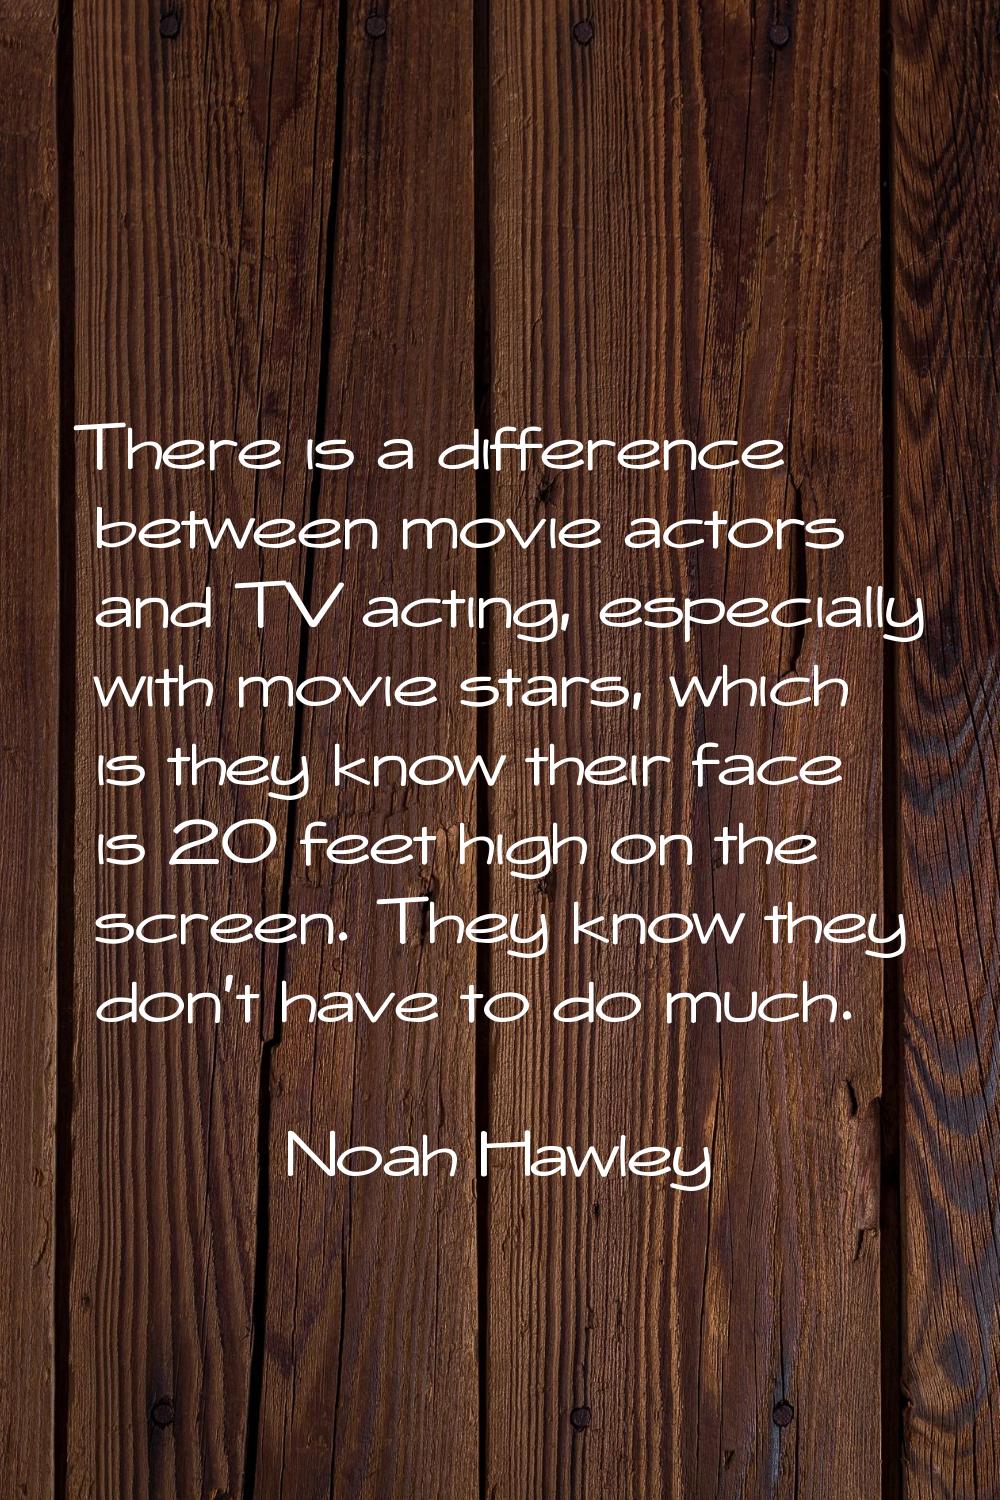 There is a difference between movie actors and TV acting, especially with movie stars, which is the